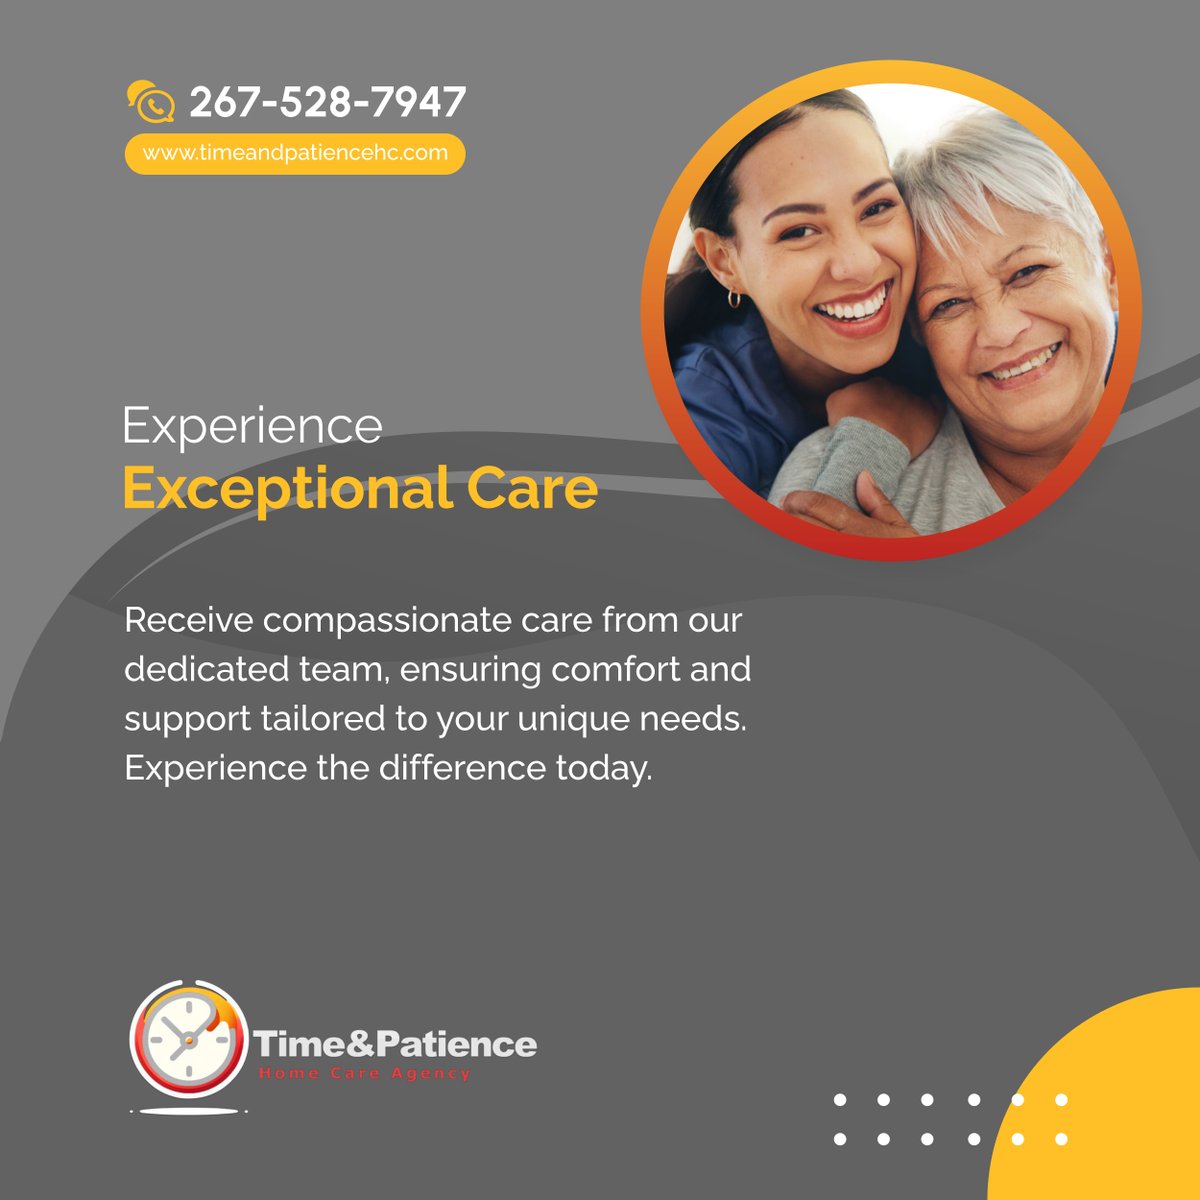 Trust our dedicated team to provide exceptional care tailored to your needs. Contact us now to learn more! 

#PhiladelphiaPA #HomeCare #ExceptionalCare